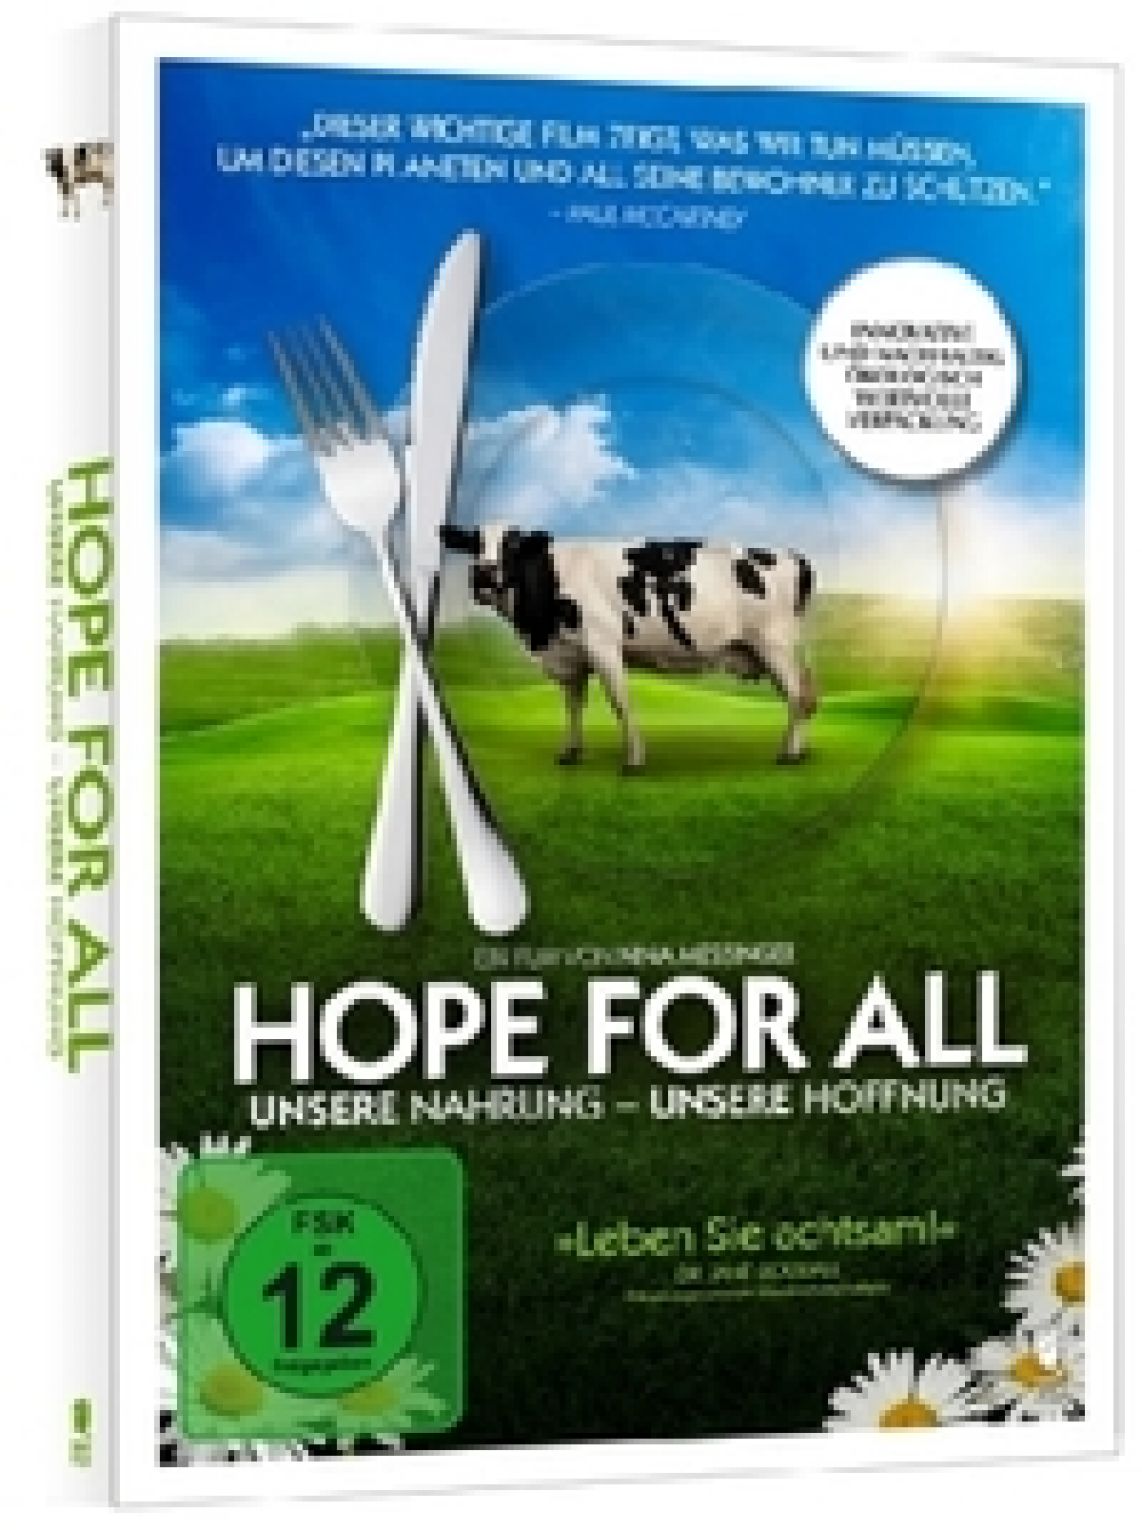 Hope for all Unsere Nahrung Unsere Hoffnung